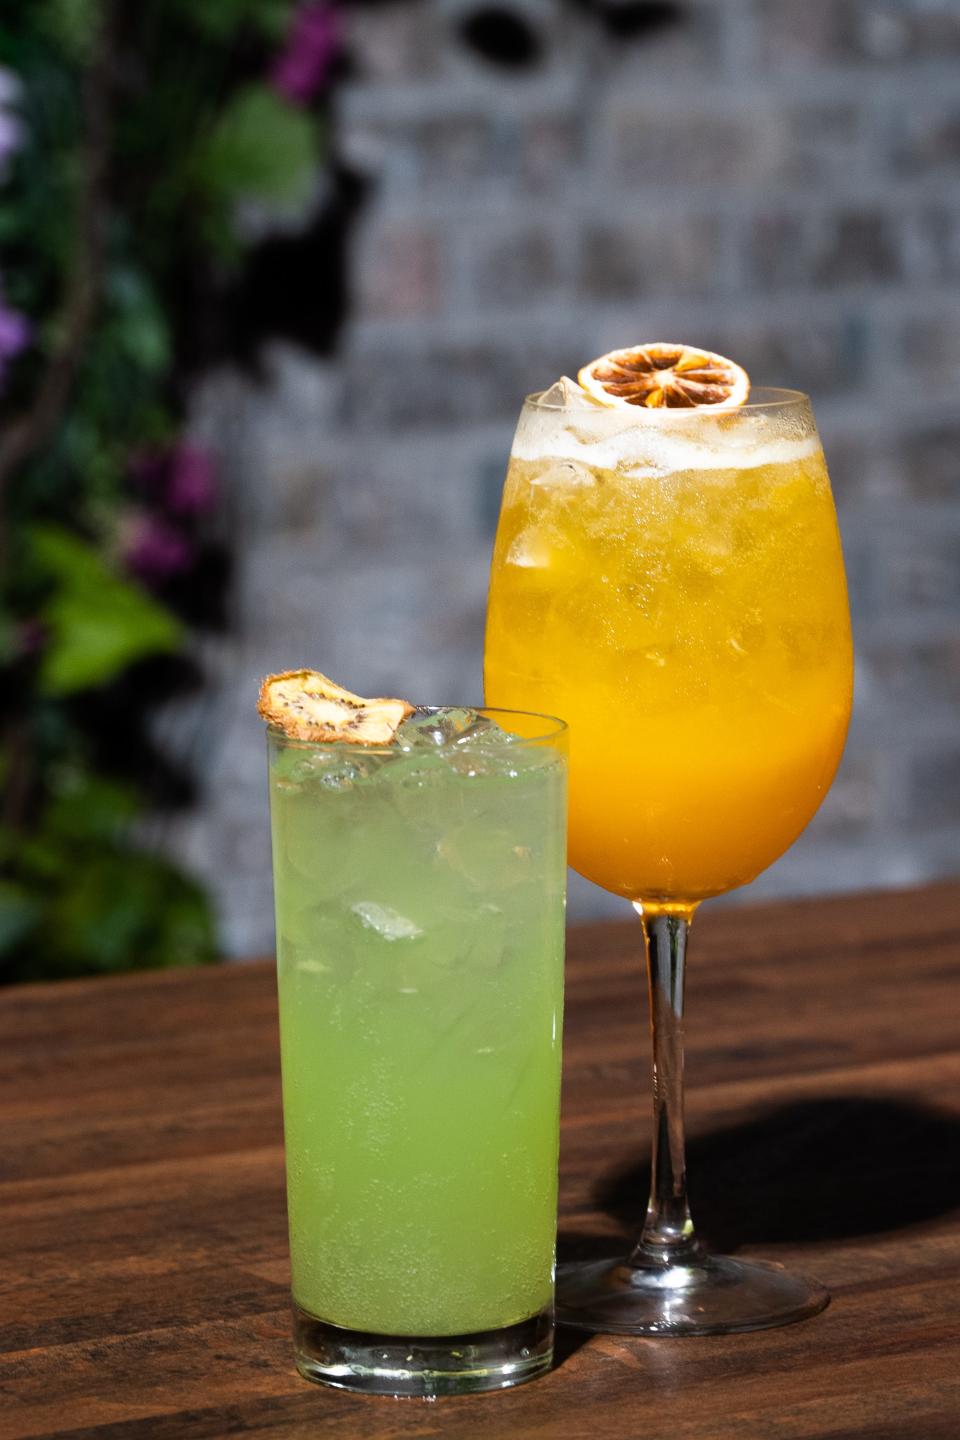 Summery cocktails, like the Kiwis Big Adventure (left) and Passion Fruit Spritz, are served at The Loaded Spoon in Freehold.